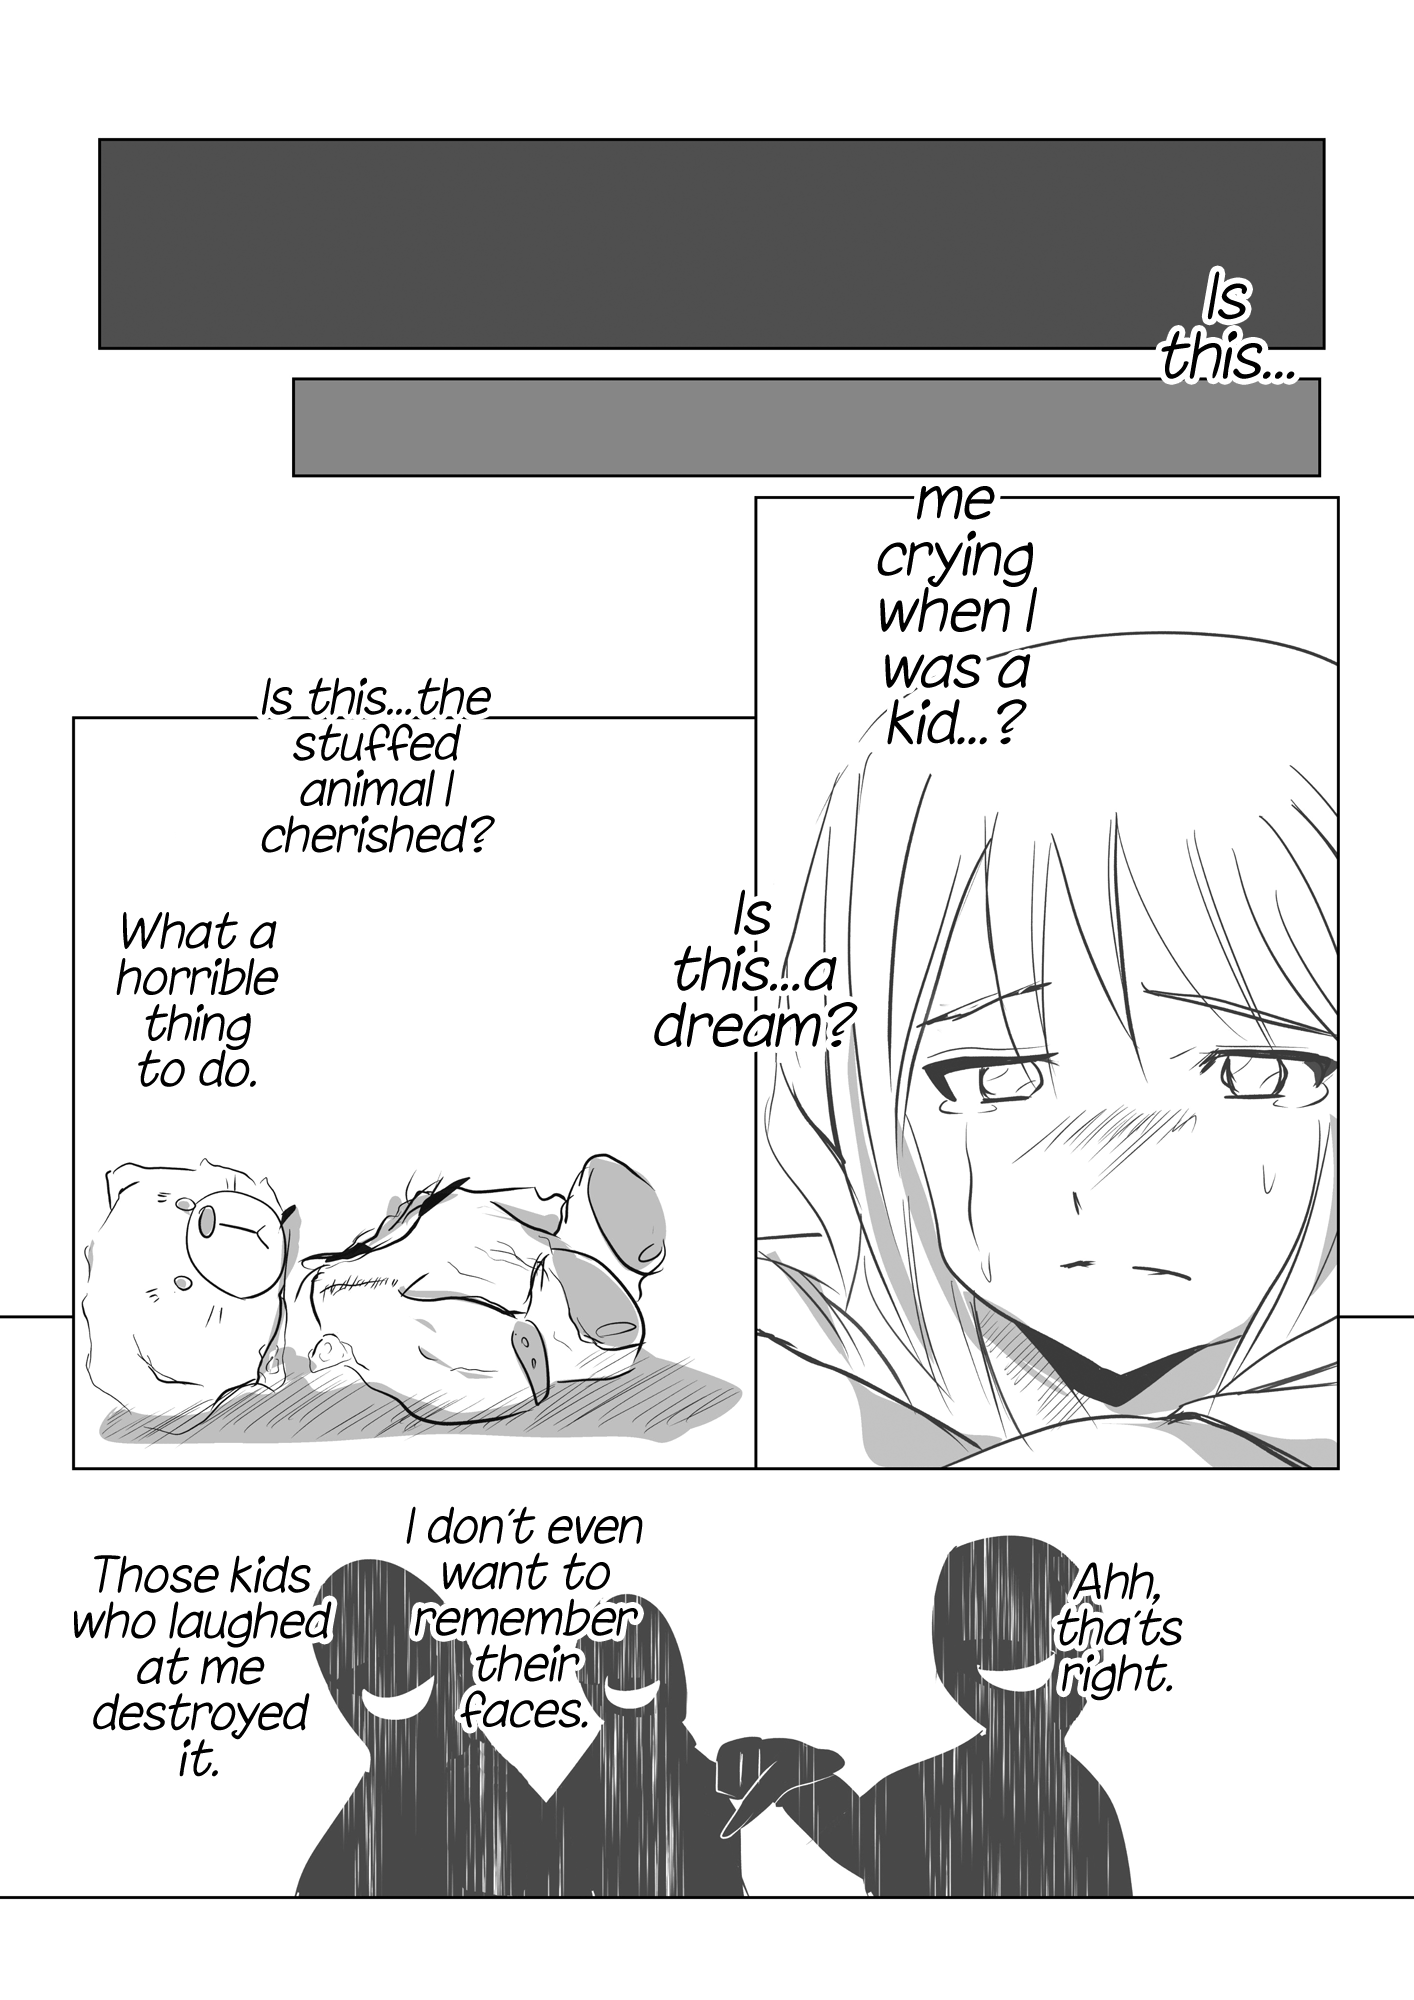 Delinquent Girl And Class Rep - Page 1